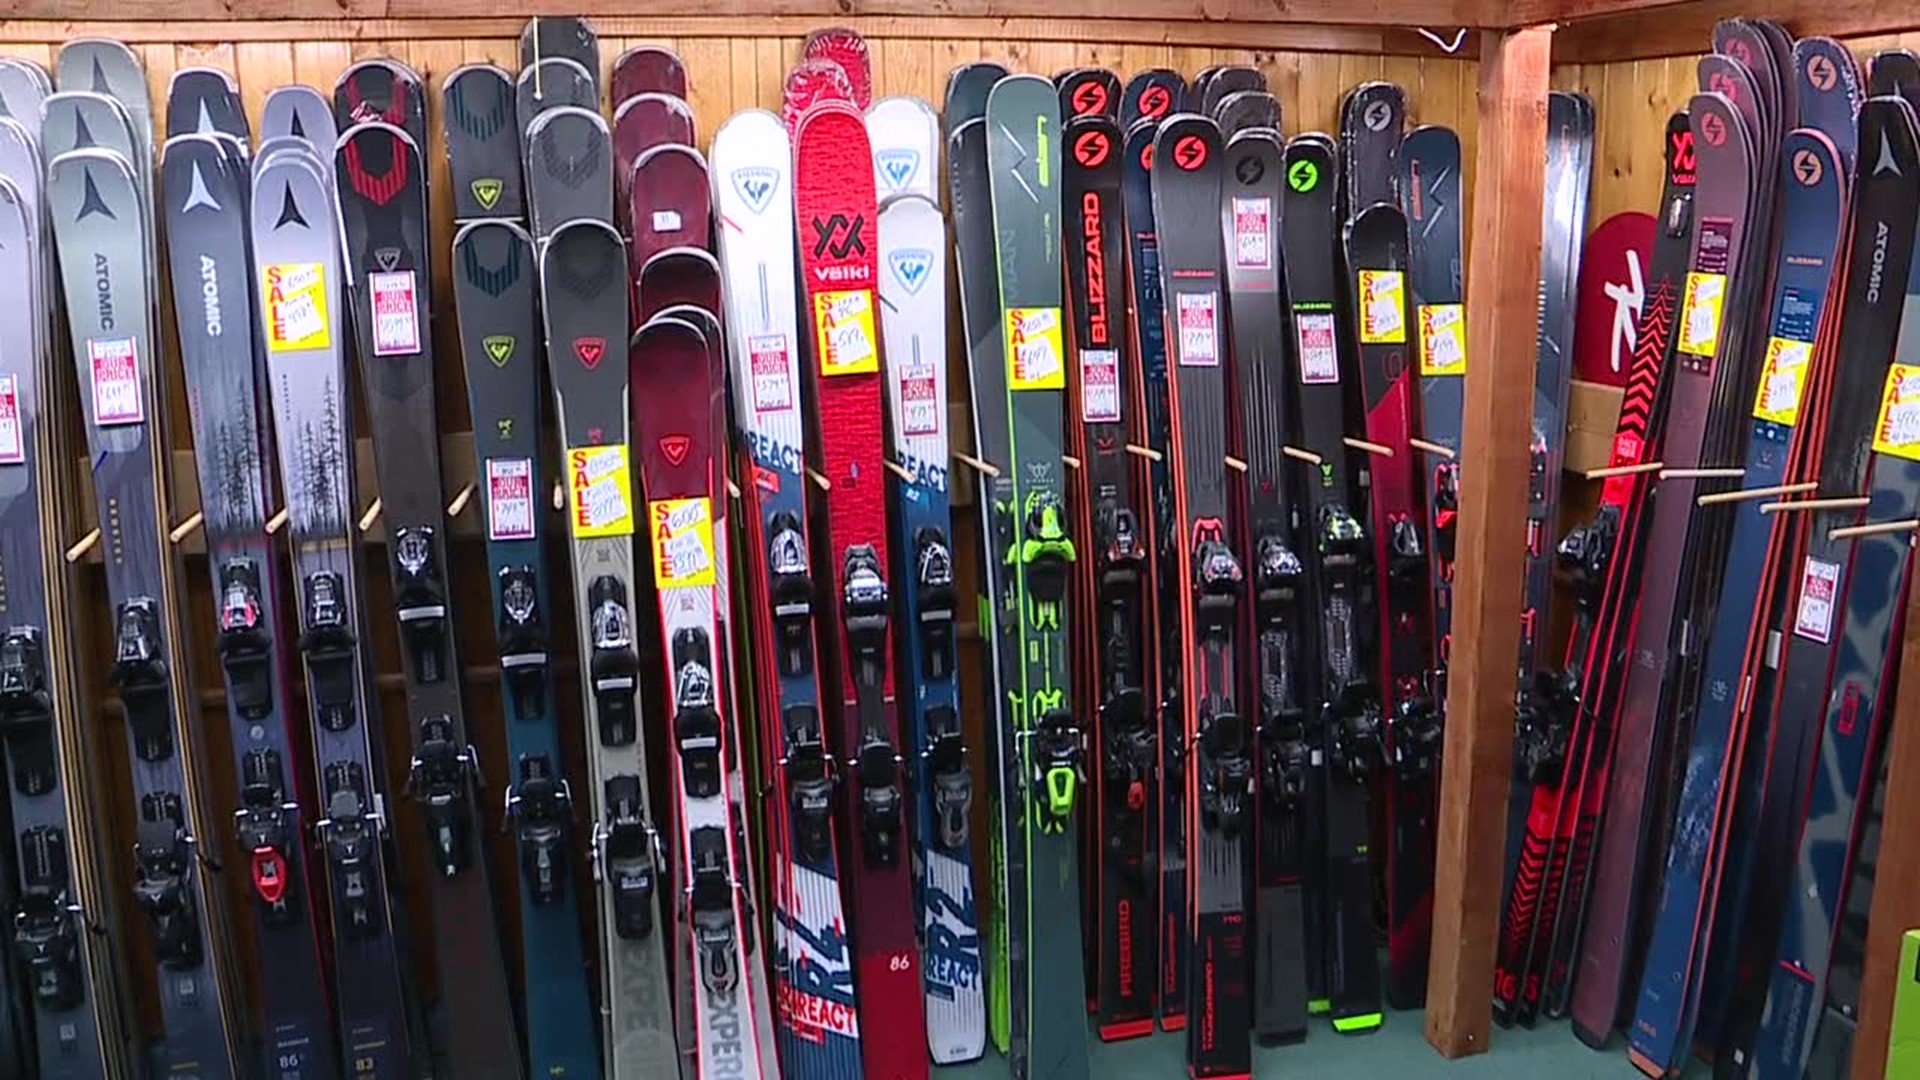 A ski shop owner in Wilkes-Barre says snow brings new people to the winter sport.